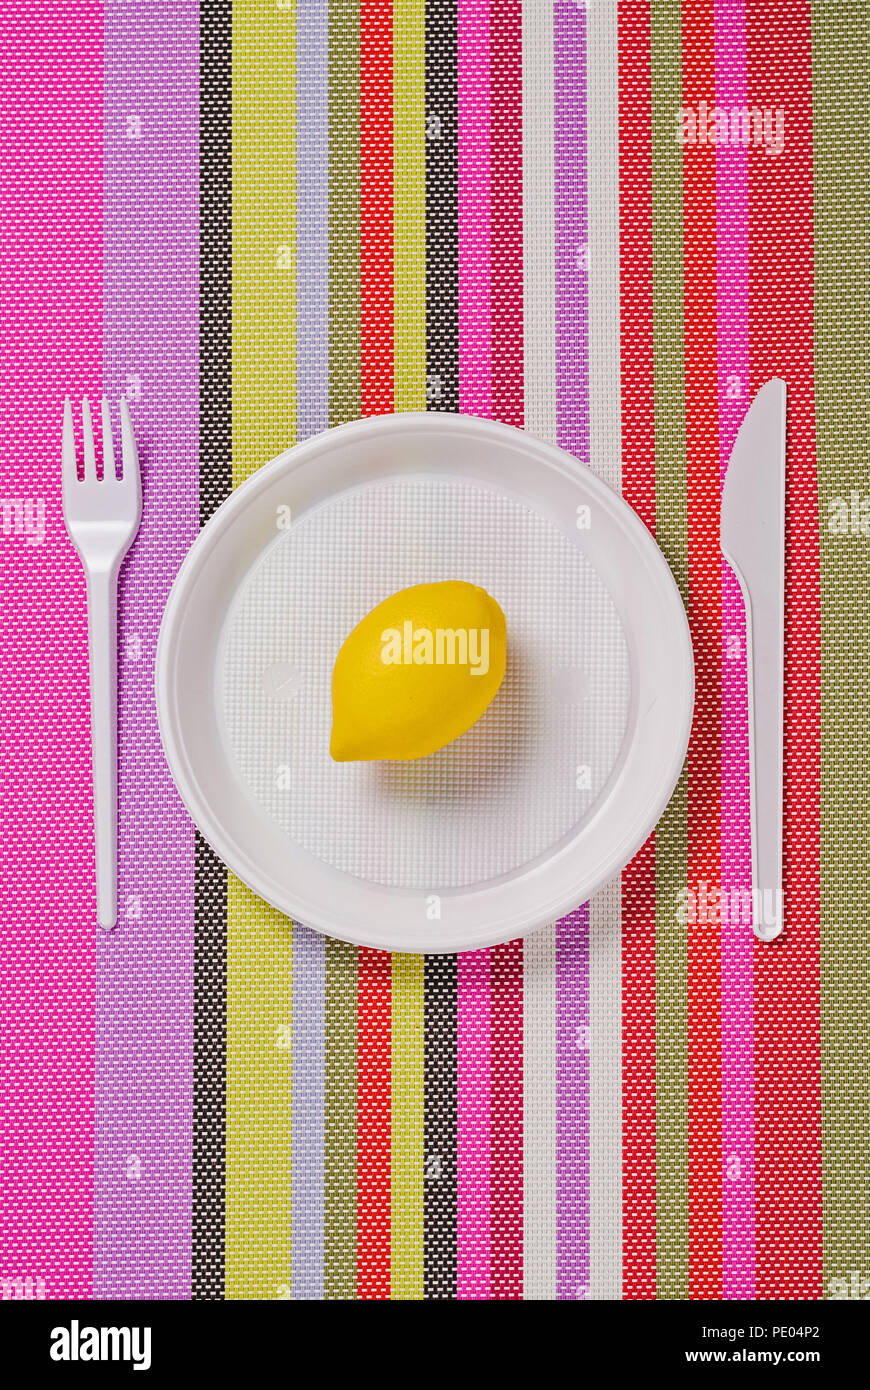 White plastic utensils, fork, plate and knife on a colored striped napkin. And yellow lemon in a plate. Stock Photo